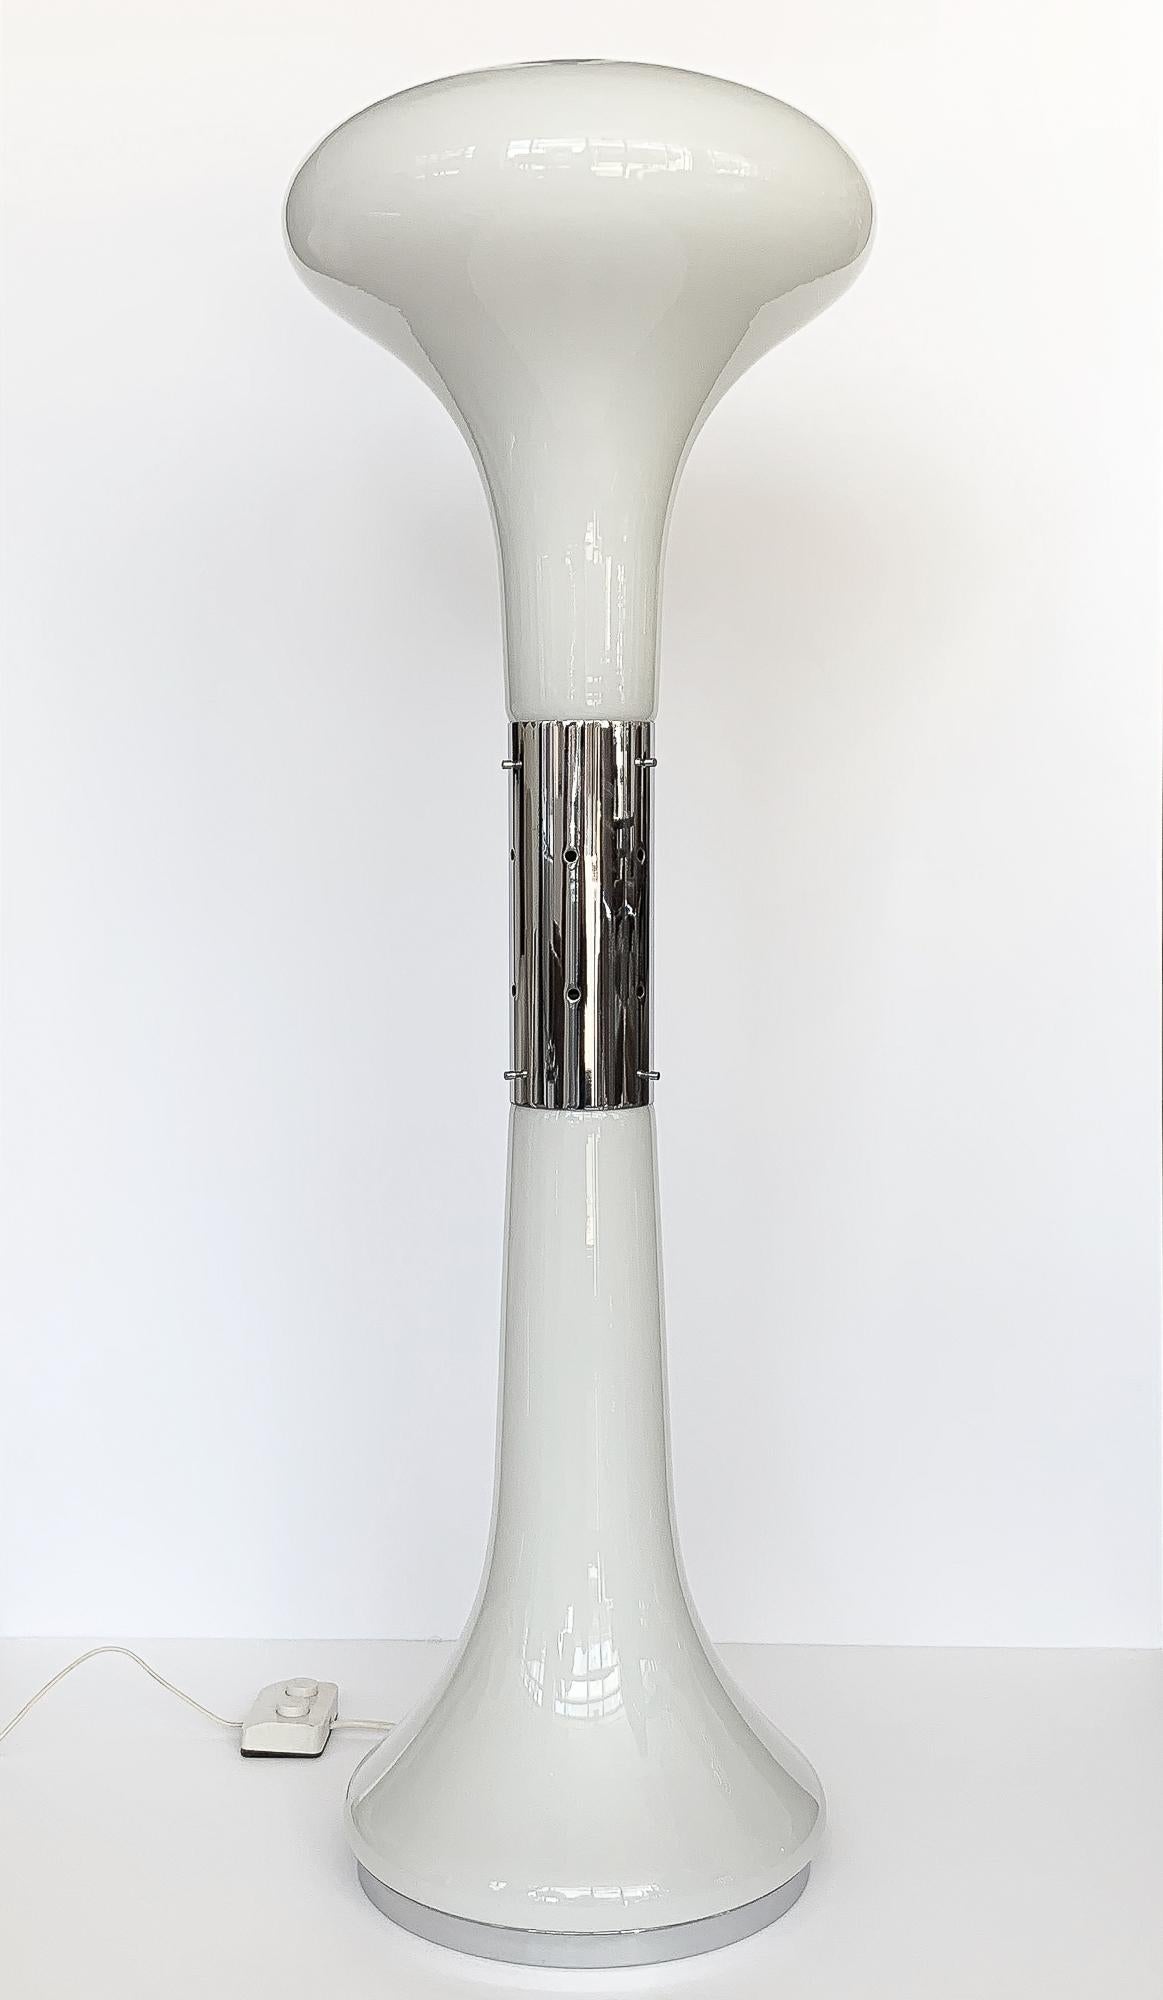 Carlo Nason I Numerati Soffiato white glass and chrome floor lamp for Mazzega, Italy circa 1960s. Comprised of two hand-blown white glass mushroom / tulip shaped glass shades with chrome plated steel collar / neck. Dual push button on/off floor